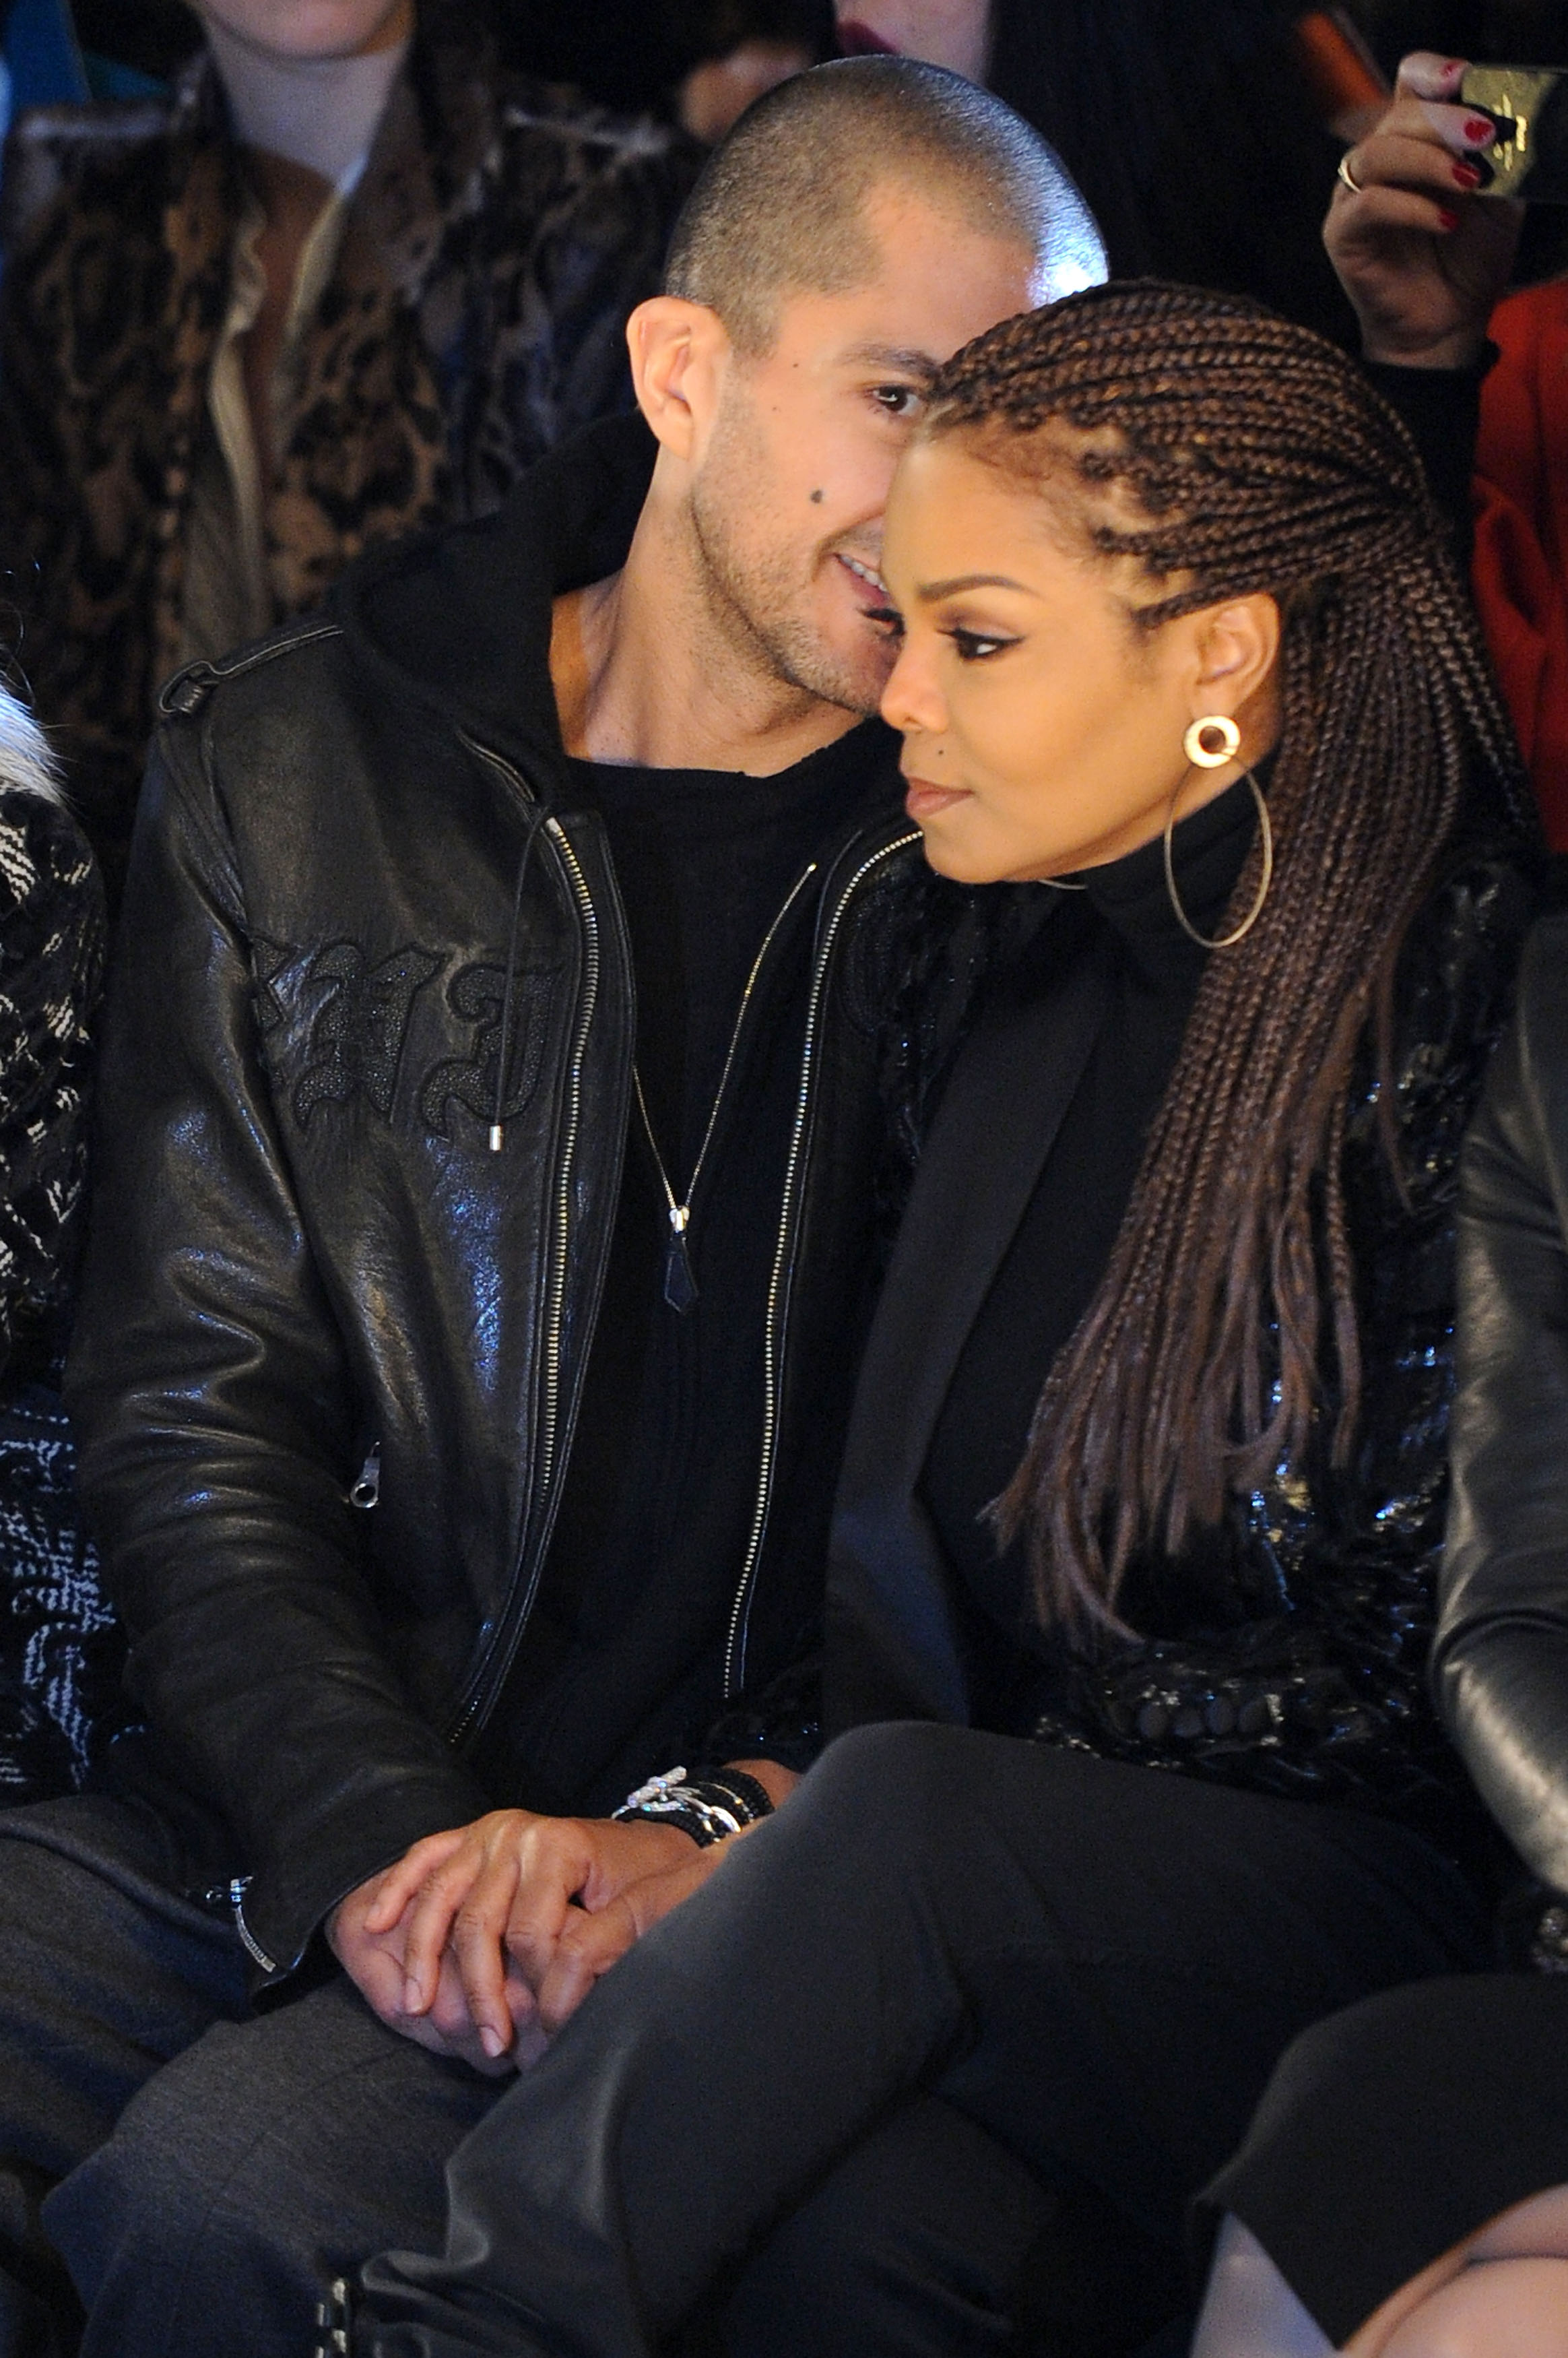 Wissam Al Mana and Janet Jackson attend the Roberto Cavalli fashion show in Milan, Italy, on February 23, 2013. | Source: Getty Images